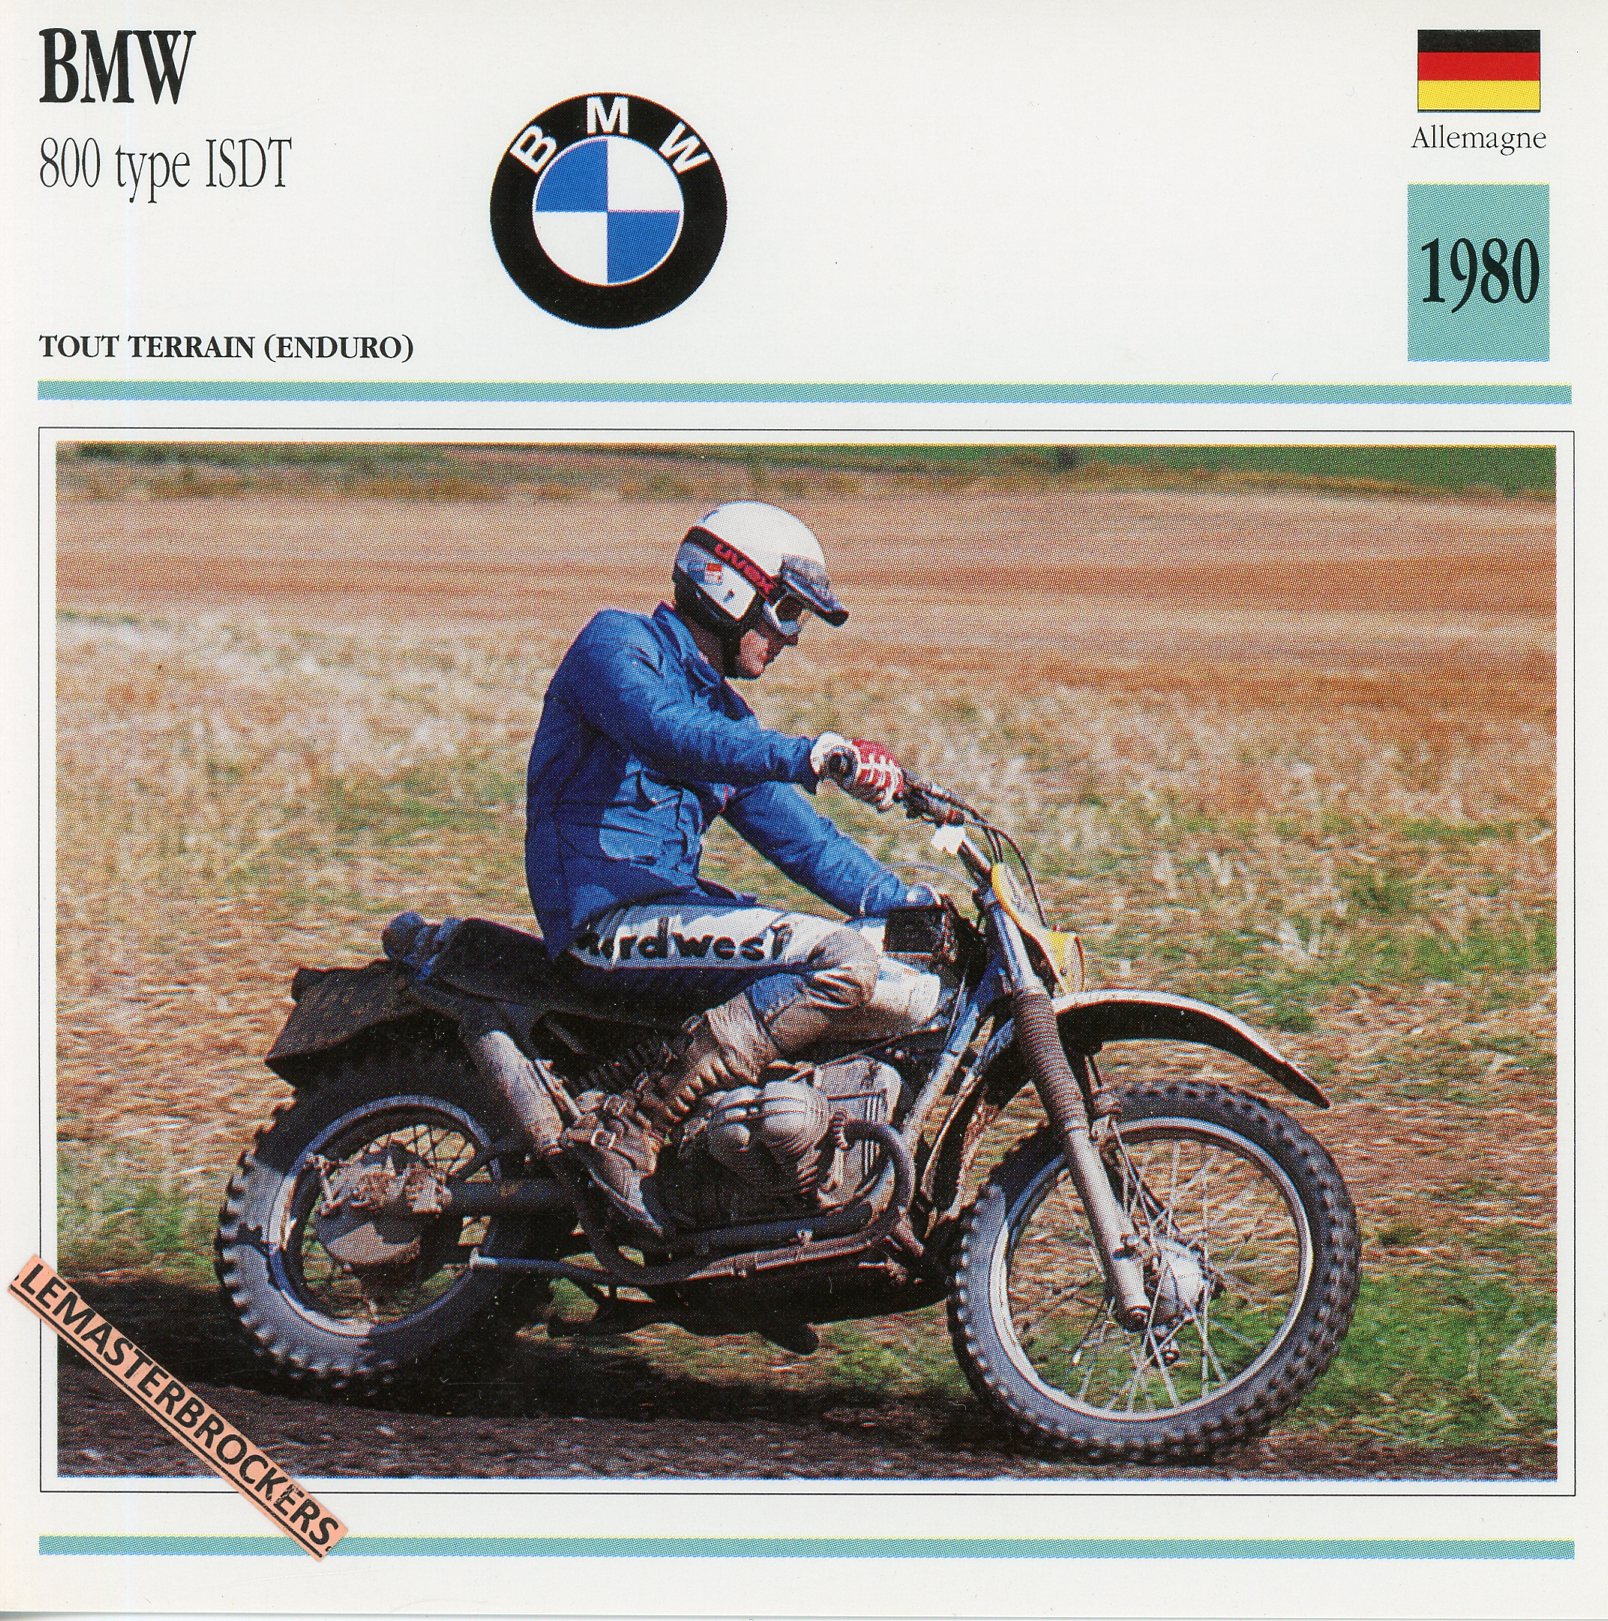 BMW-800-ISDT-1980-FICHE-MOTO-MOTORCYCLE-CARDS-ATLAS-LEMASTERBROCKERS